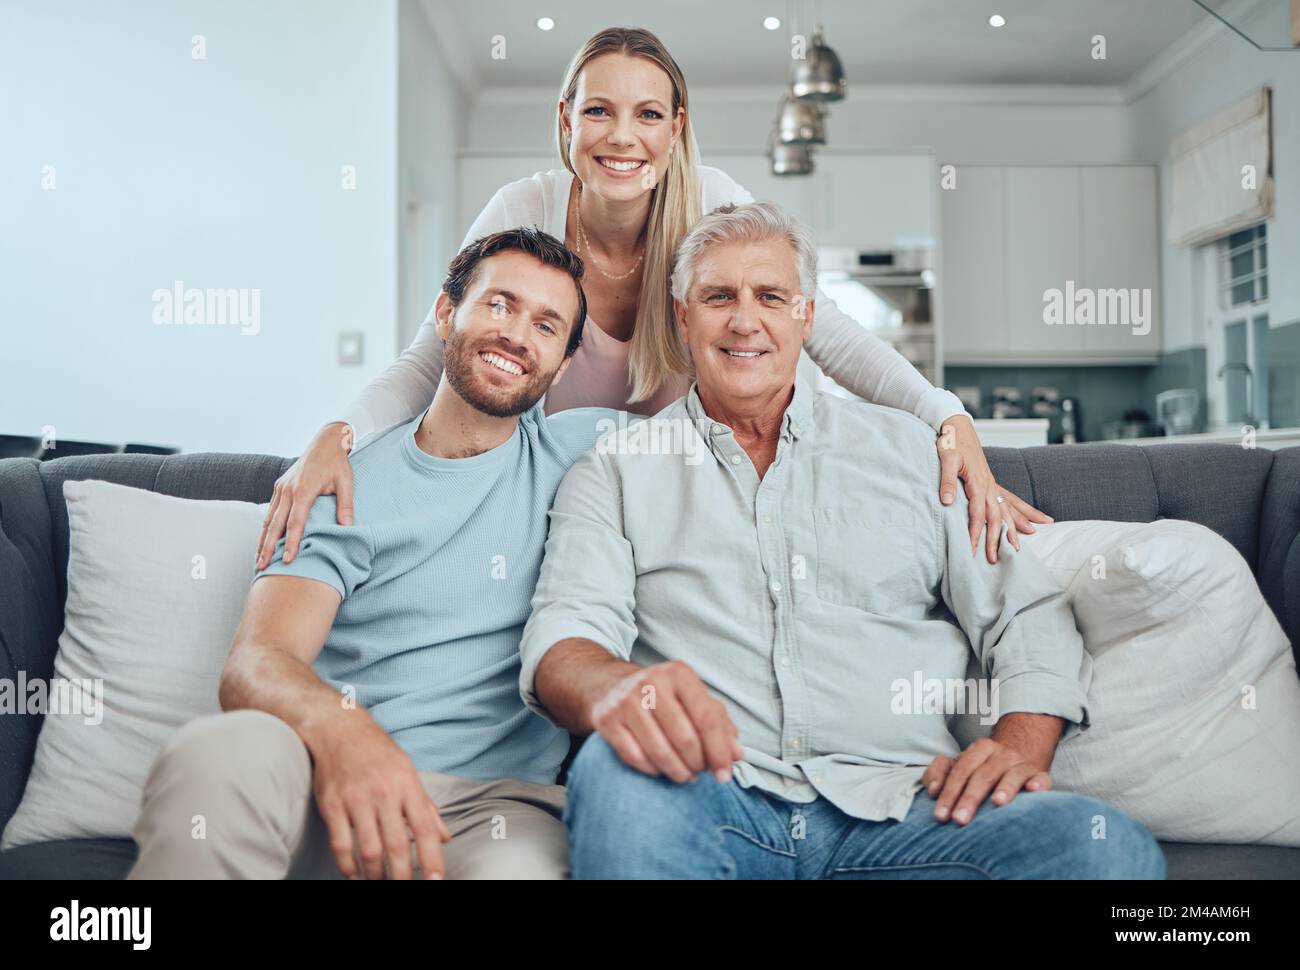 Family, portrait and relax on sofa in living room, smiling and bonding. Love, care and happy man, woman and grandfather sitting on couch having fun Stock Photo